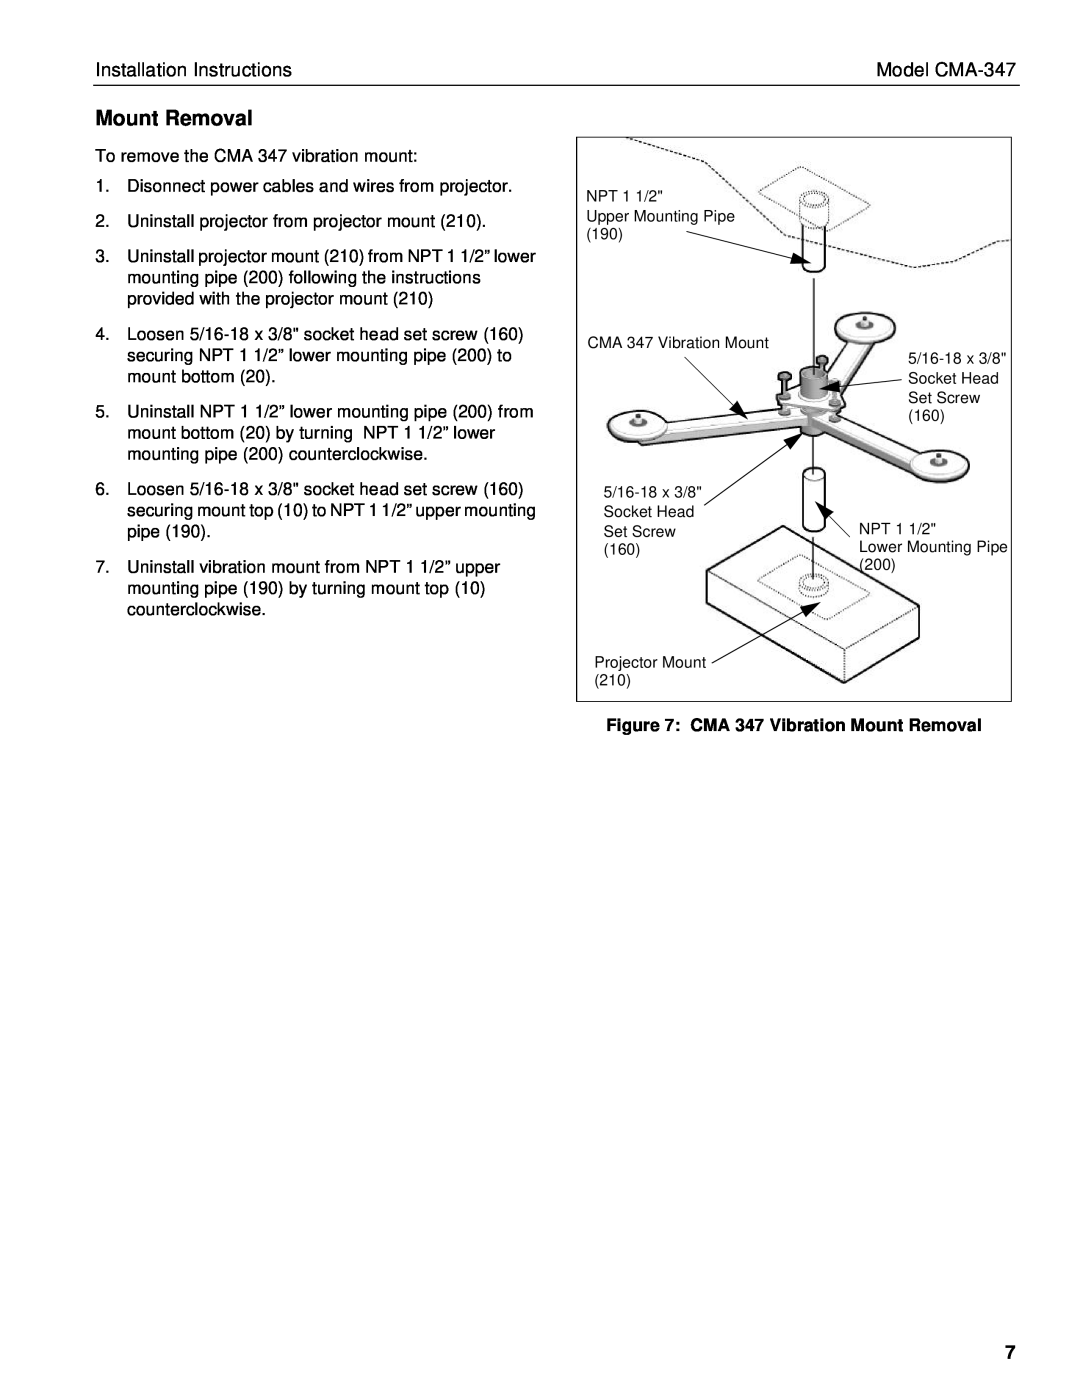 Chief Manufacturing CMA 347 Vibration Mount Removal, Installation Instructions, Model CMA-347 